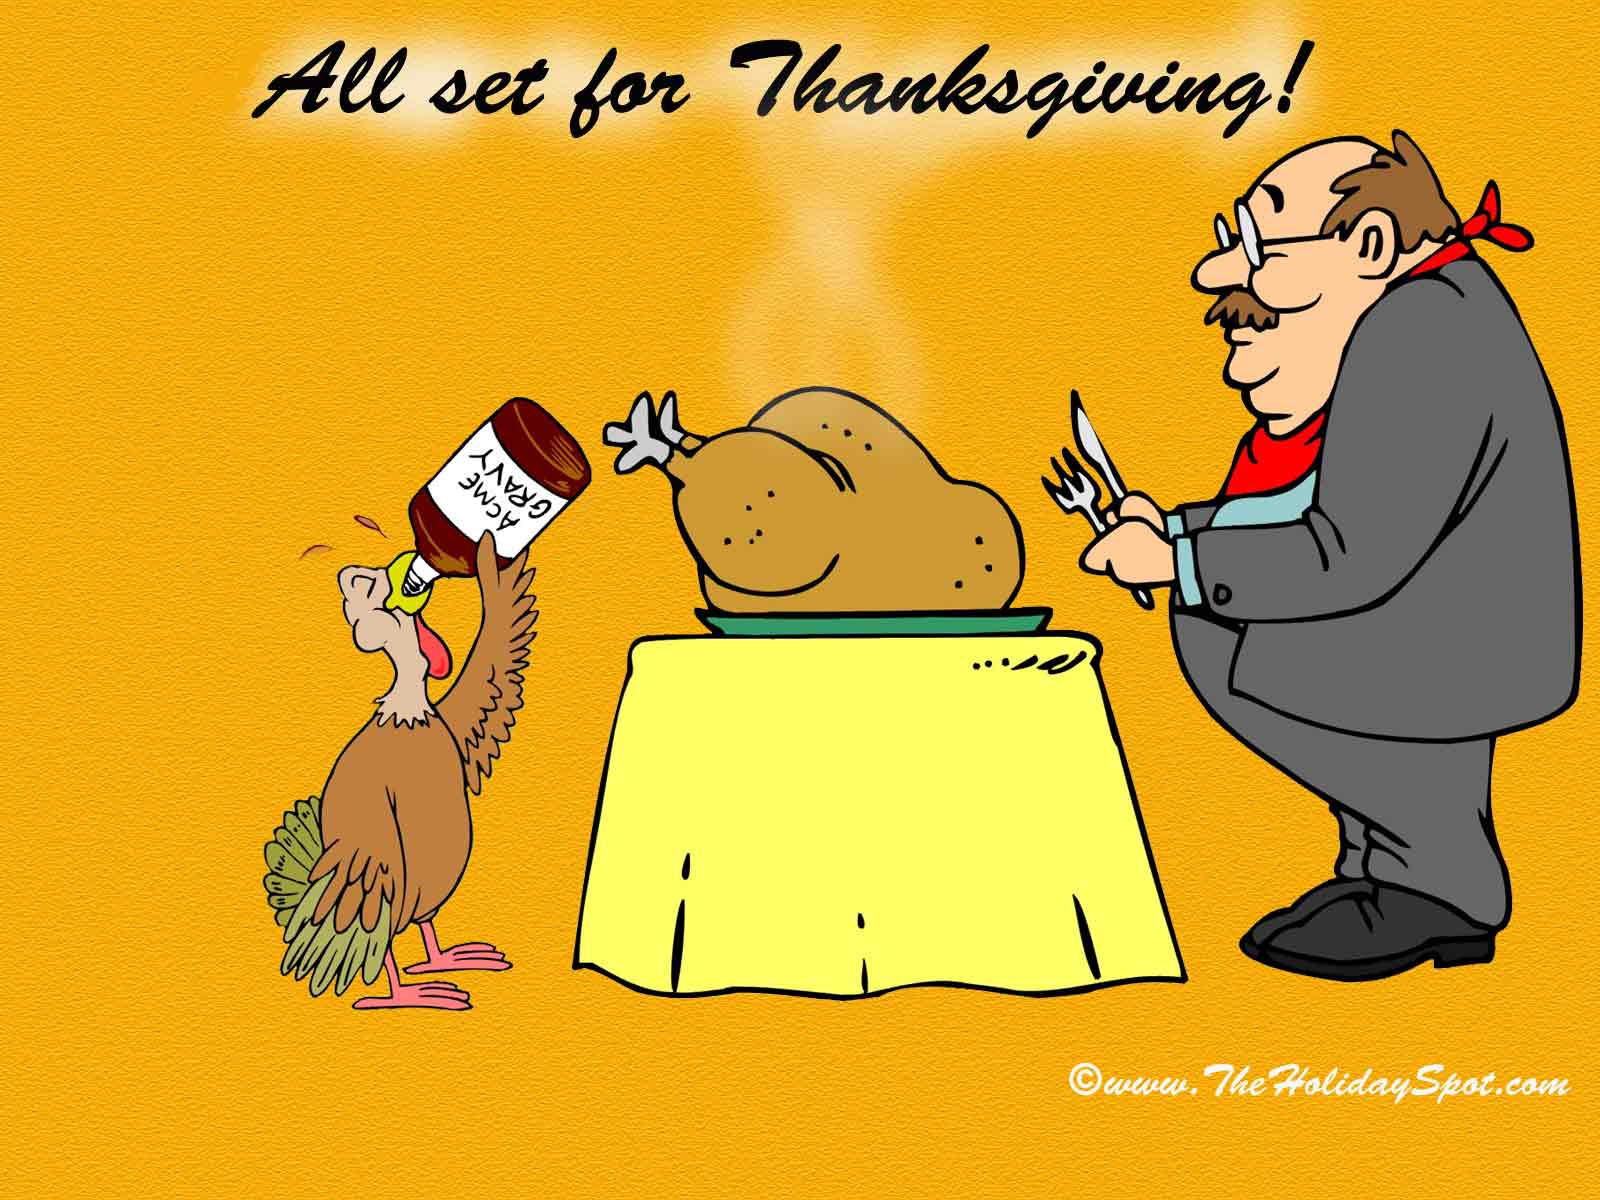 Funny thanksgiving image. High Definition Wallpaper Collection